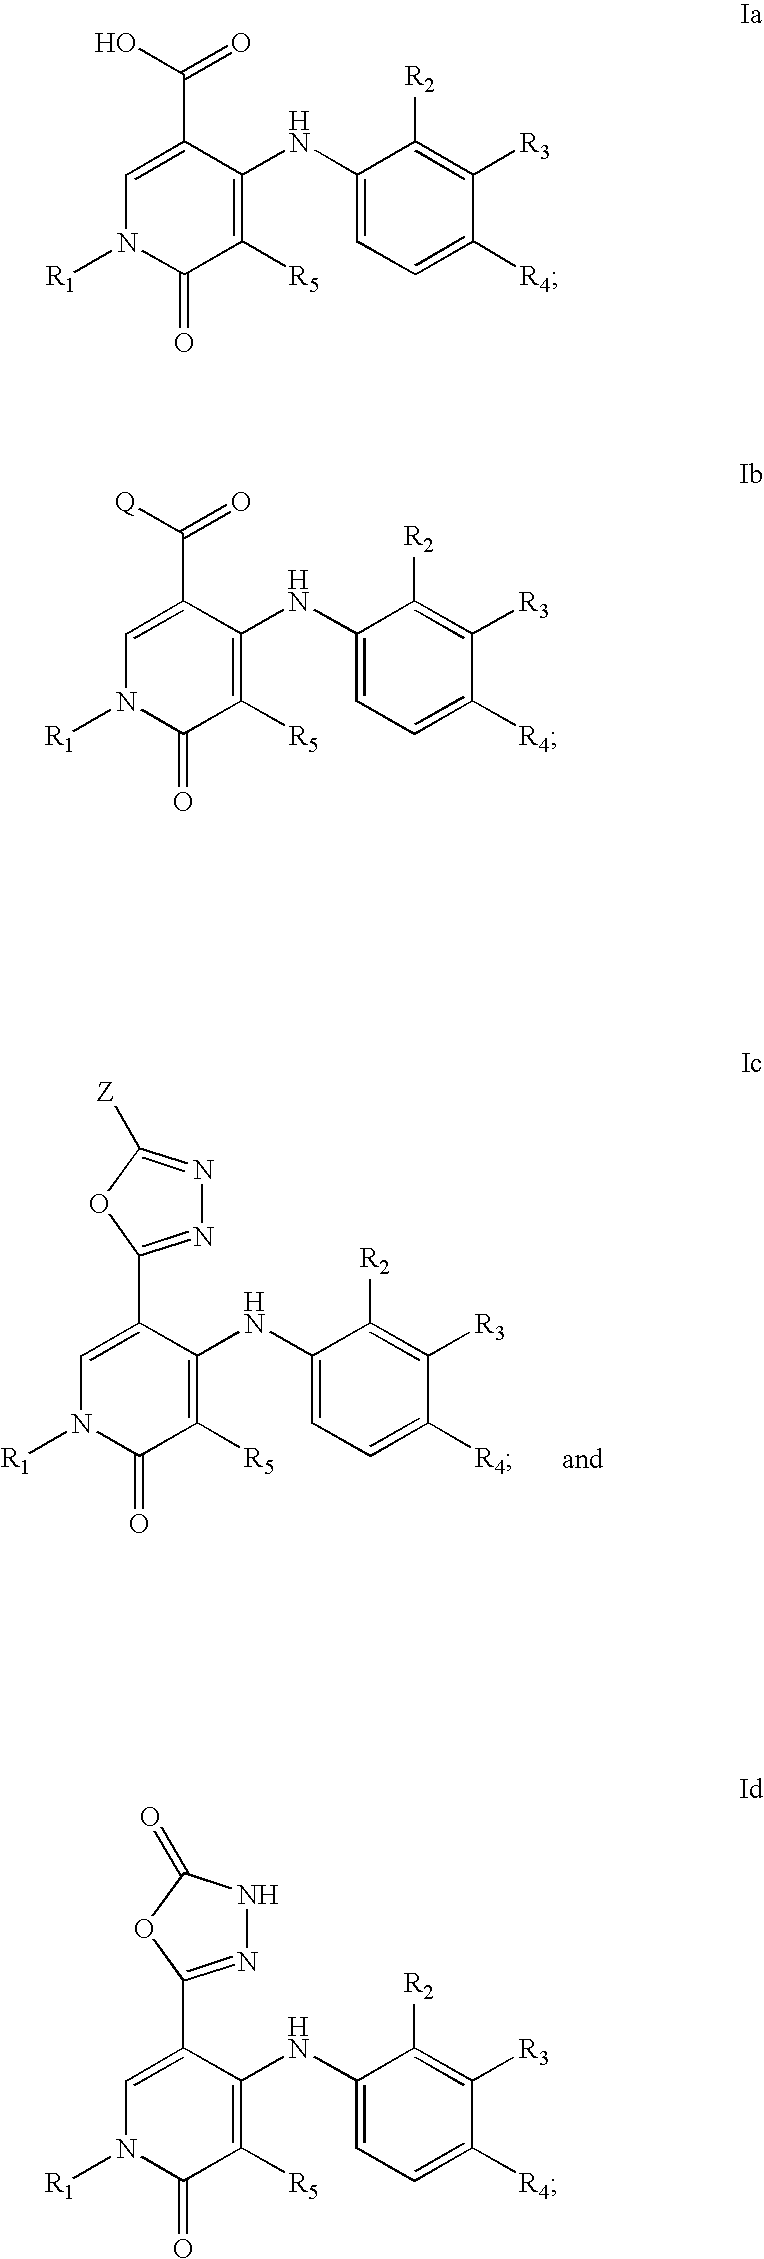 5-substituted-4-[(substituted phenyl) amino]-2-pyridone derivatives